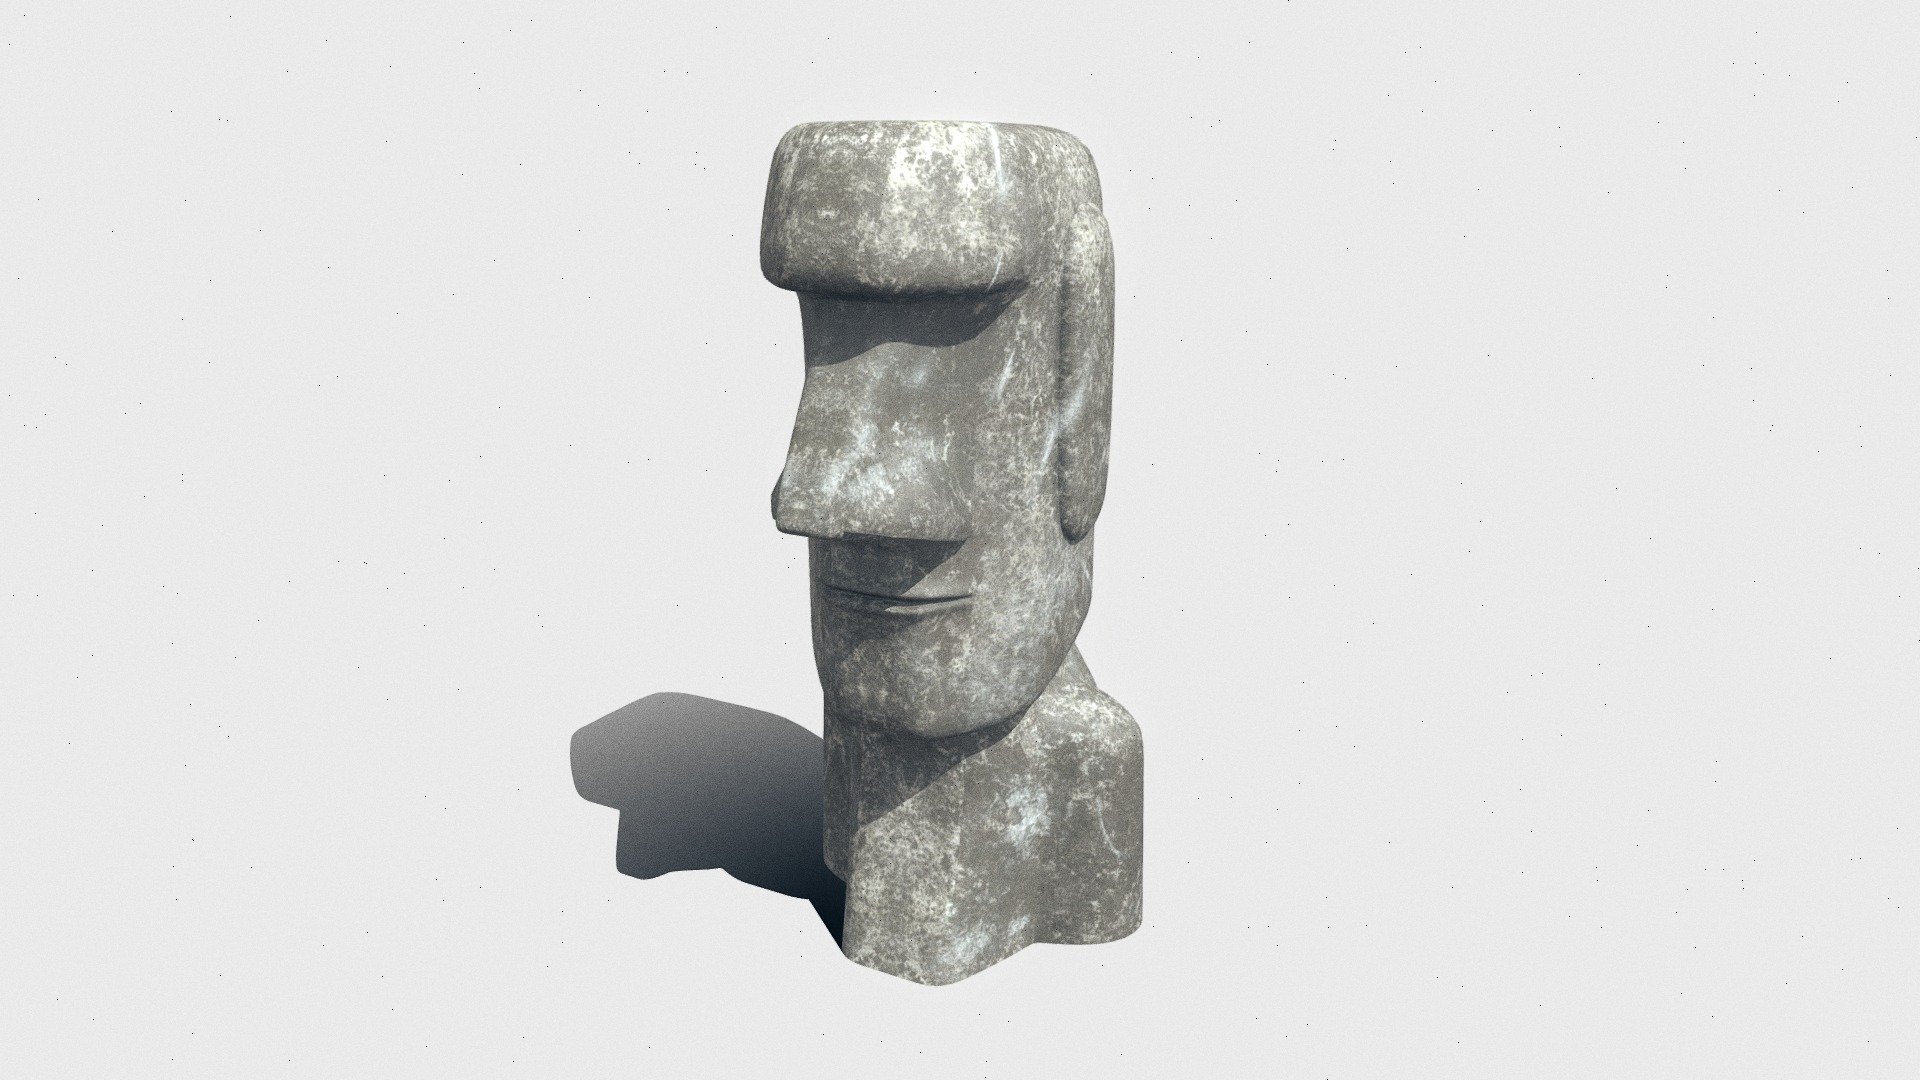 A random project I decided to do. I used some reference images of the Easter Island Statues from online sources to recreate the look of the actual statues. 

Tools Used:
Blender, Substance Painter 3d model